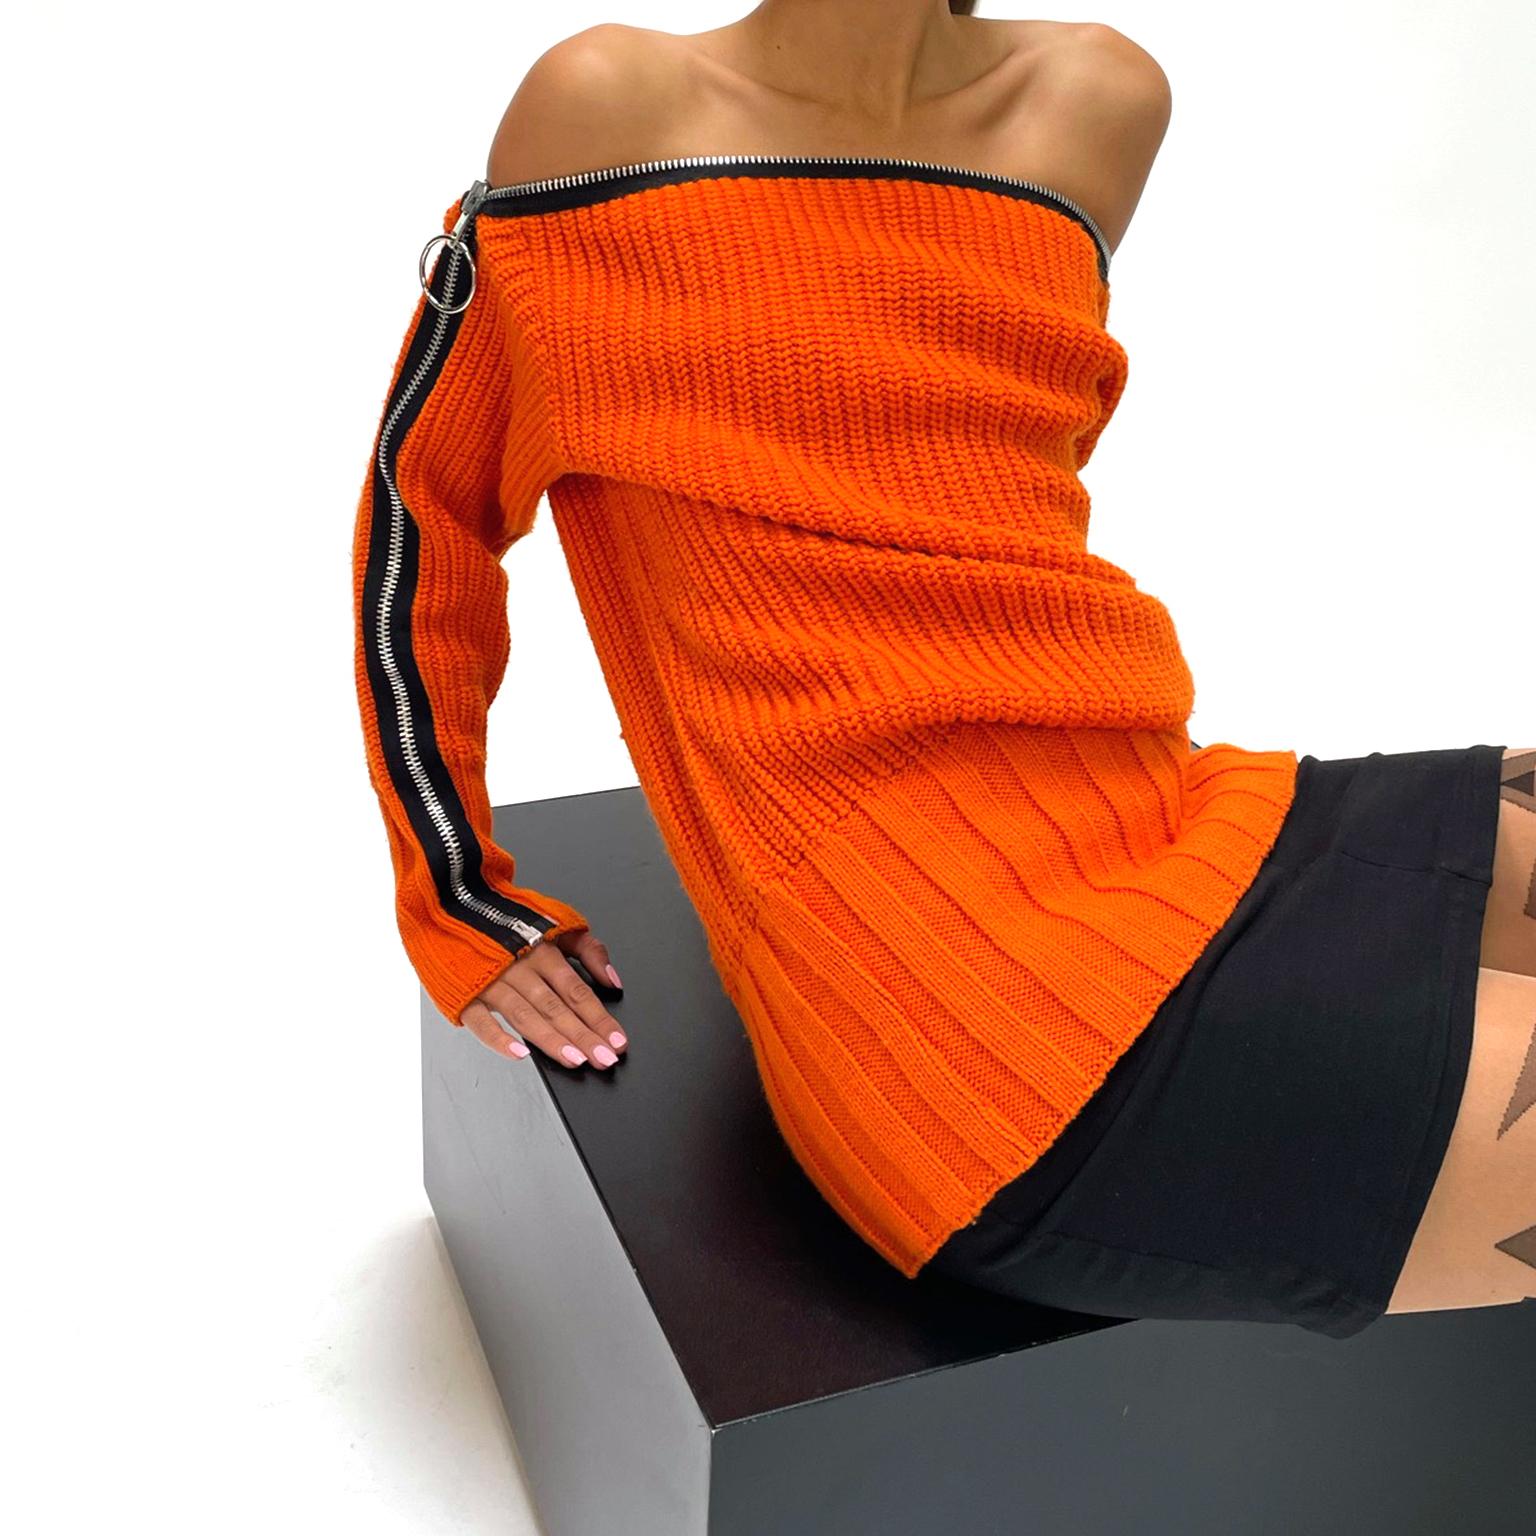 This is a really fun vintage 1980's Betsey Johnson 2 piece outfit with a gorgeous orange chunky knit sweater with a dramatic black zipper and a stretch bodycon tube style black skirt that slips on without closures. The sweater can be worn in a